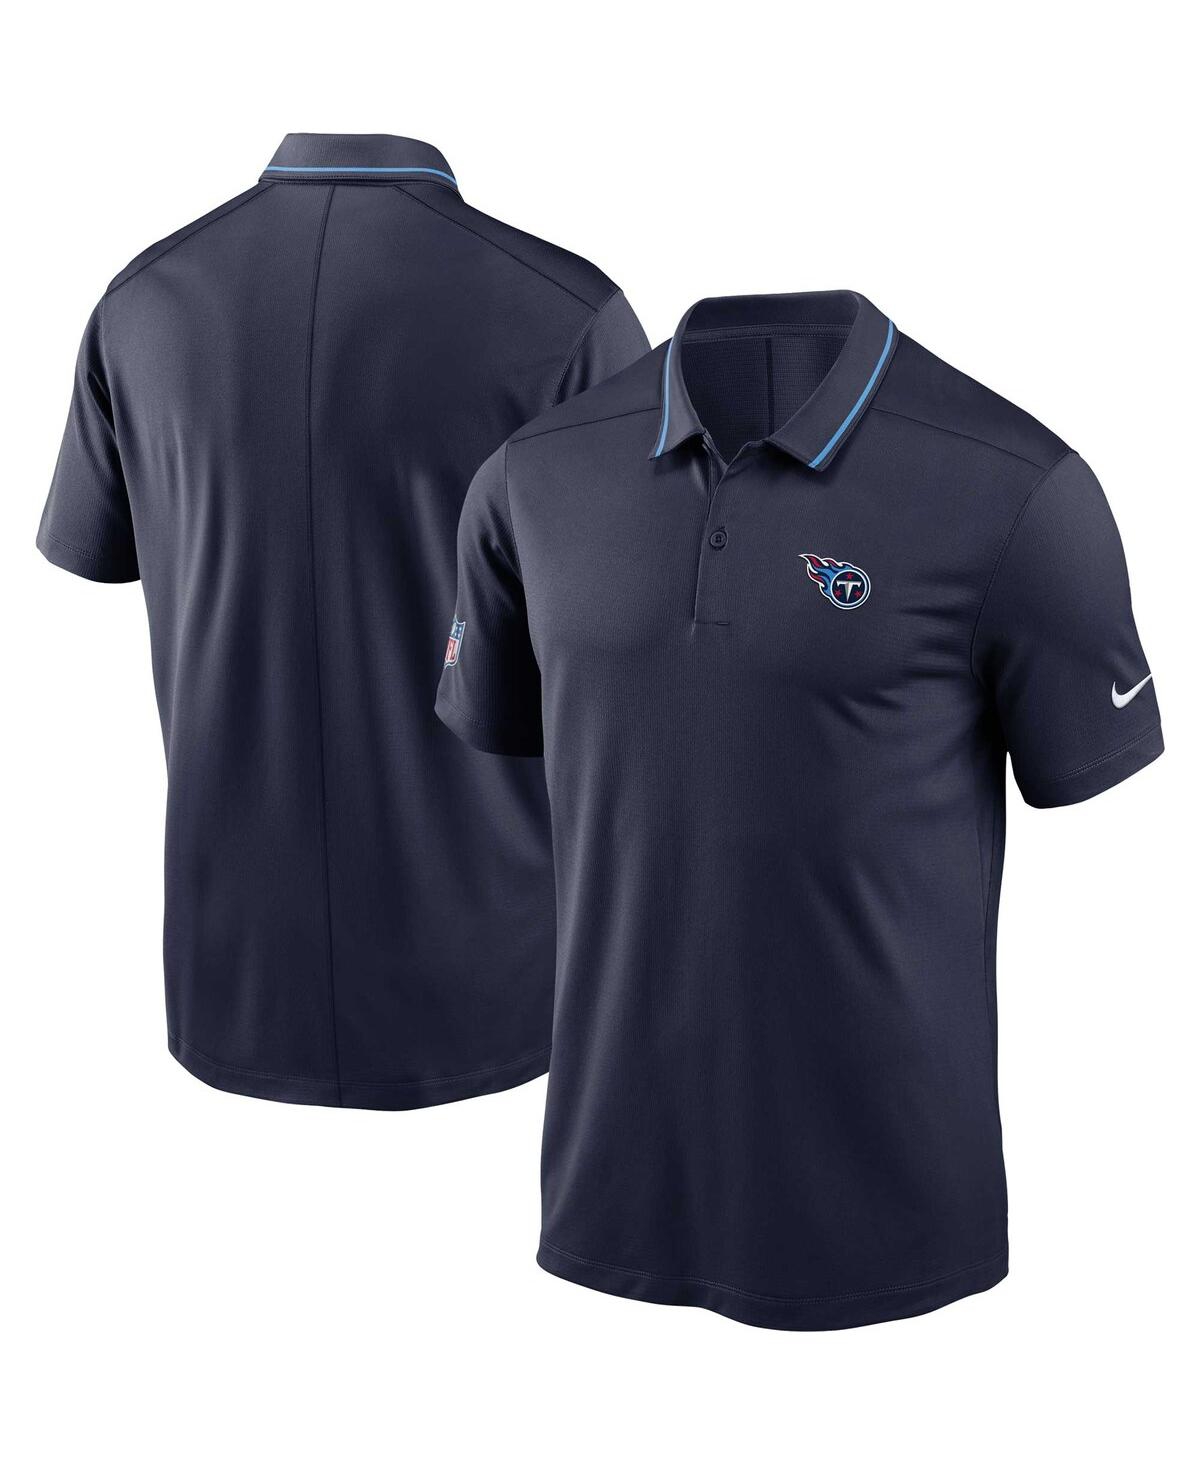 Nike Men's  Navy Tennessee Titans Sideline Victory Performance Polo Shirt